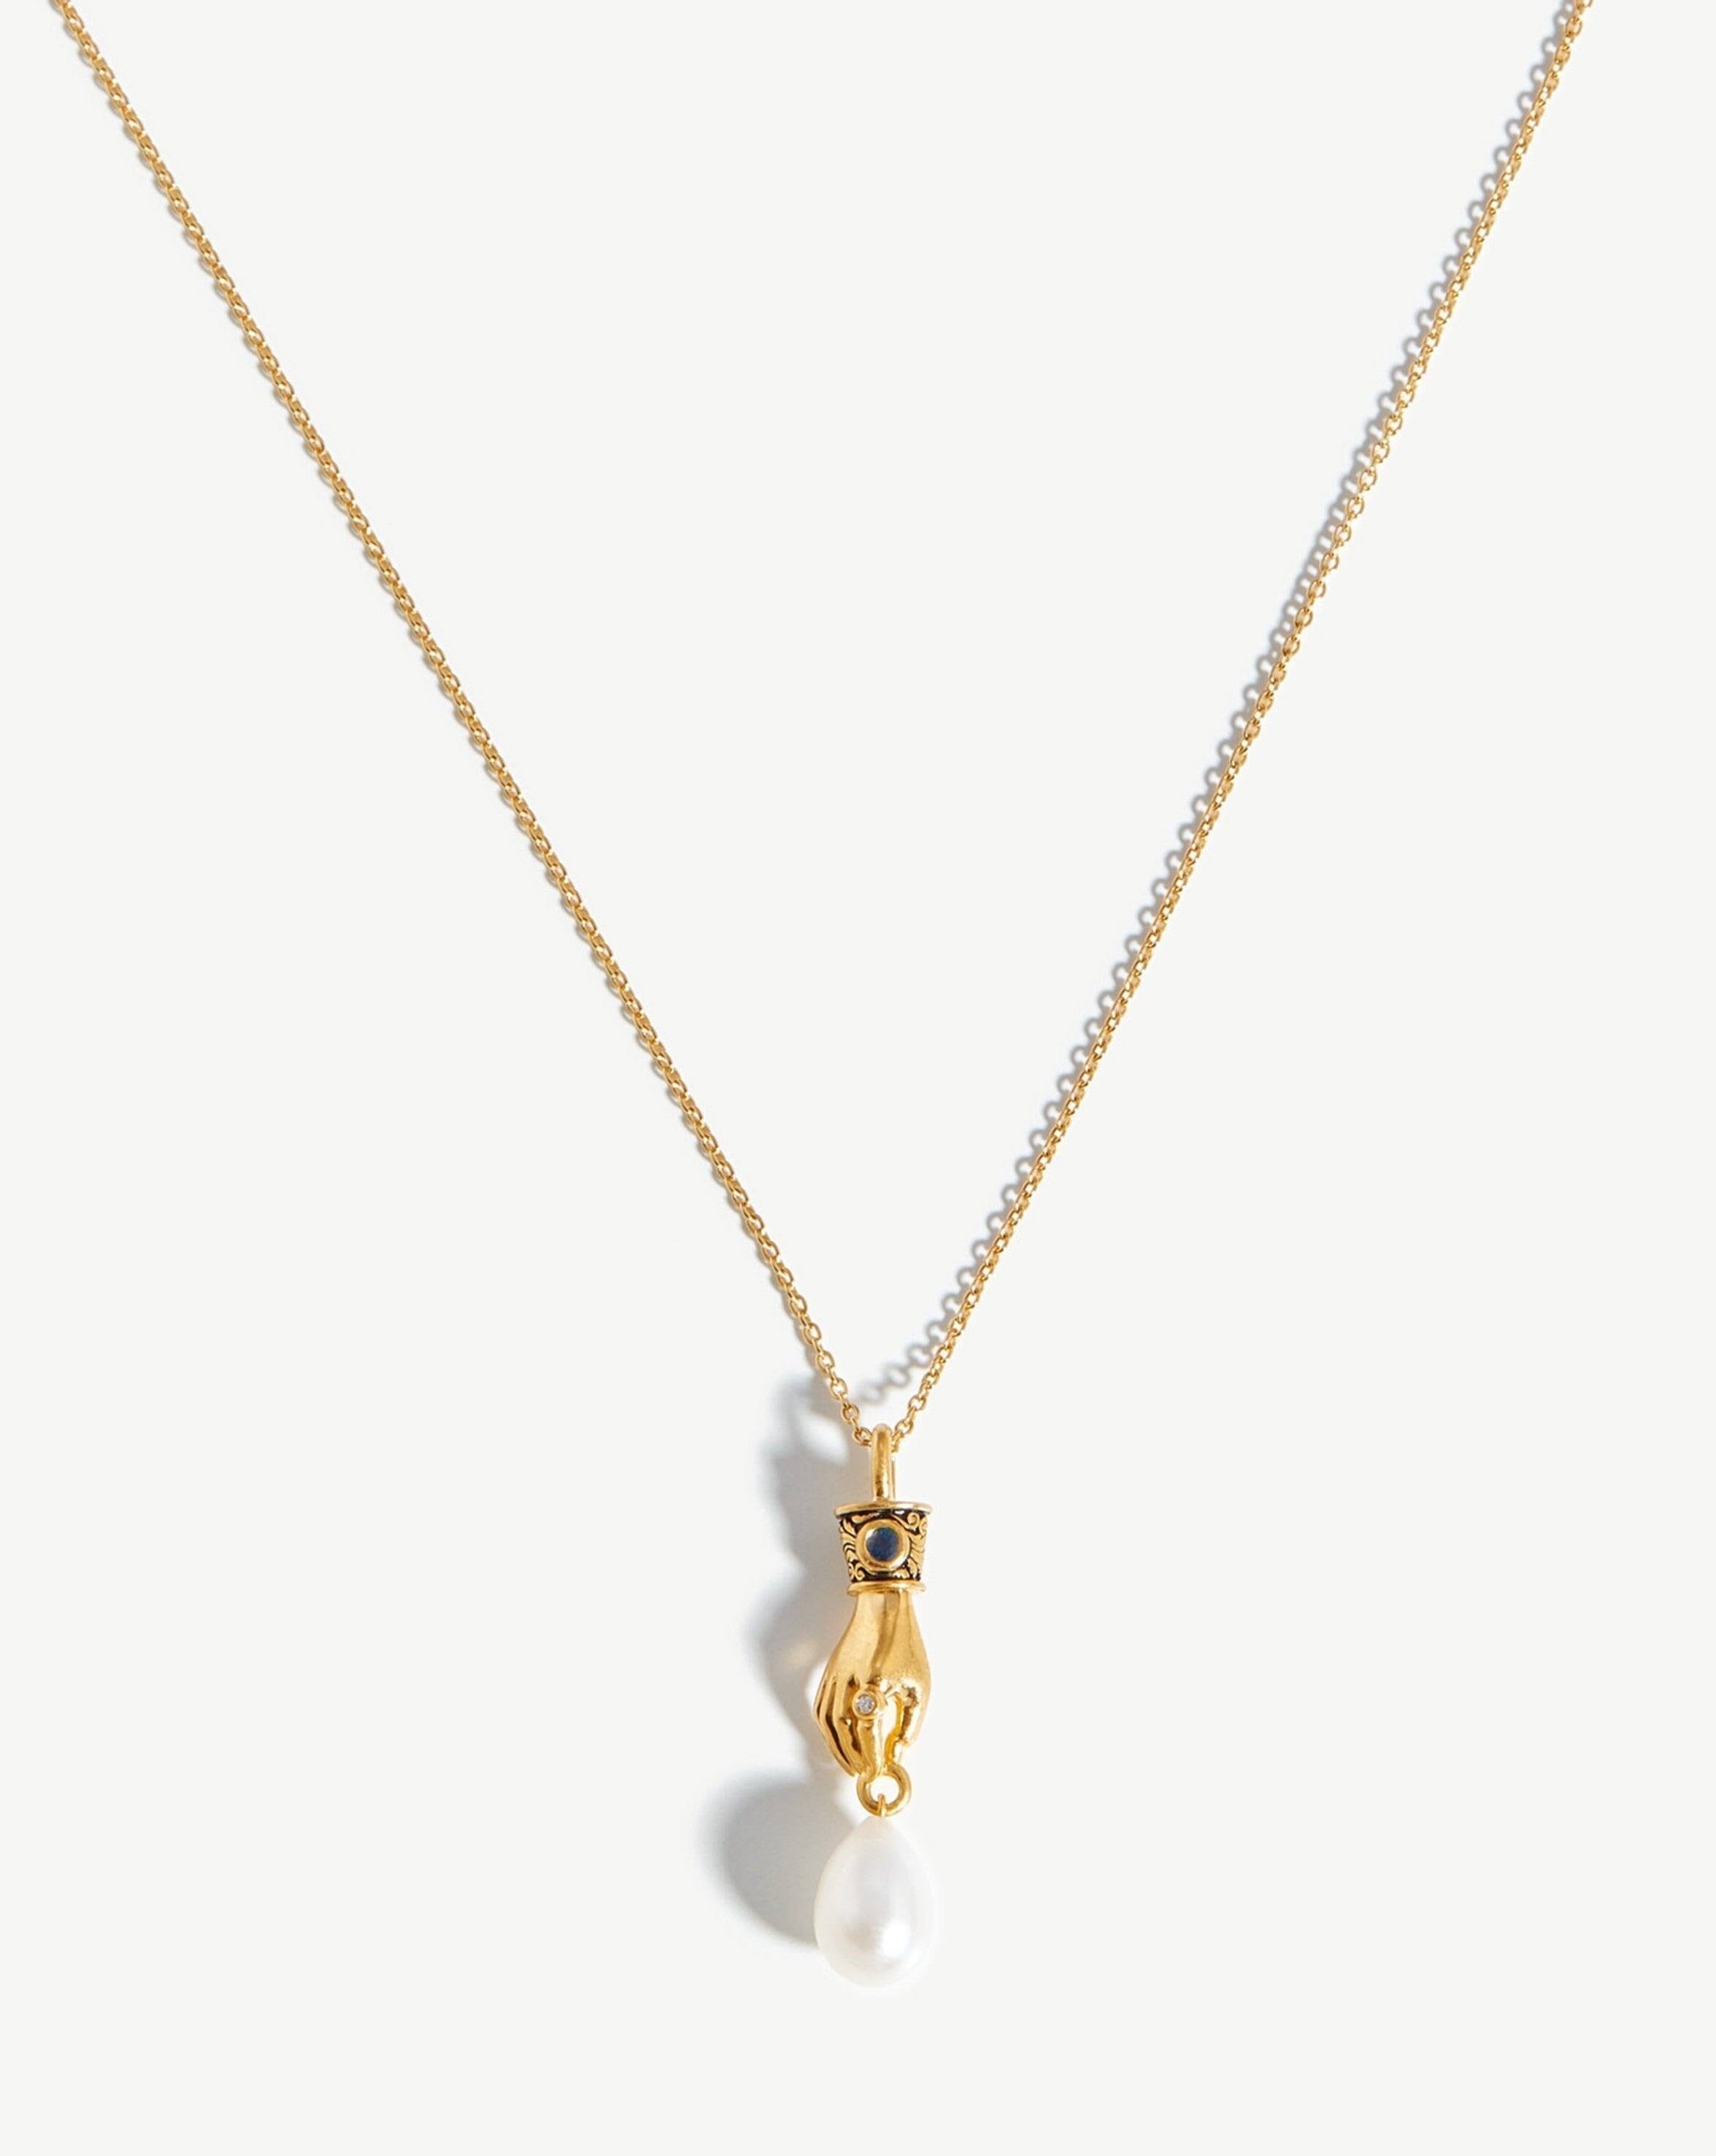 Symbol Necklace 'Two hearts, one love' 14ct yellow gold | Legendurn.com